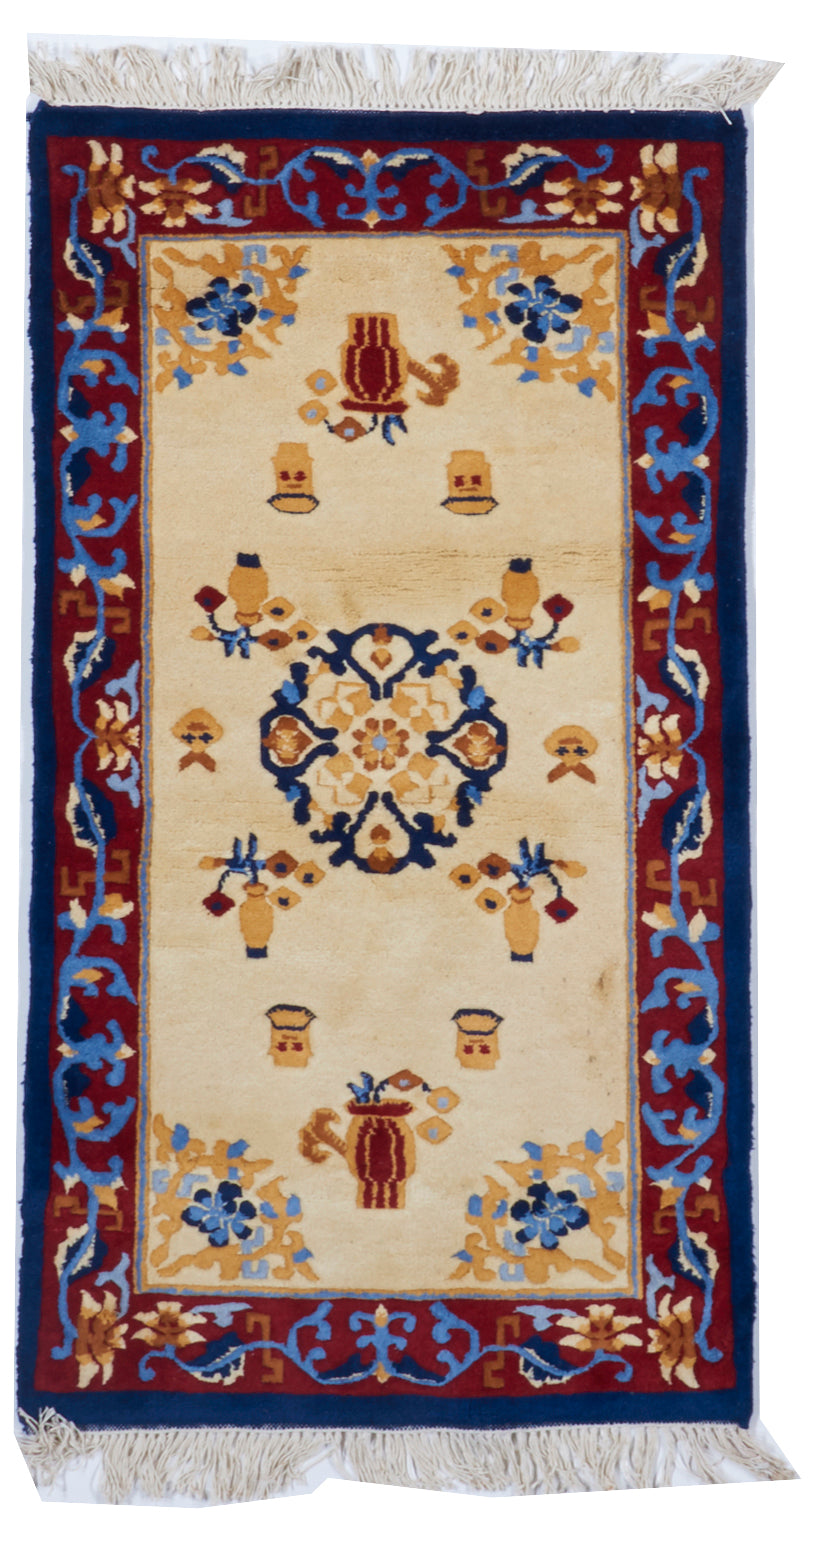 Traditional Hand Knotted Ivory Navy Blue Wool Rug 2'9 x 4'11 - IGotYourRug